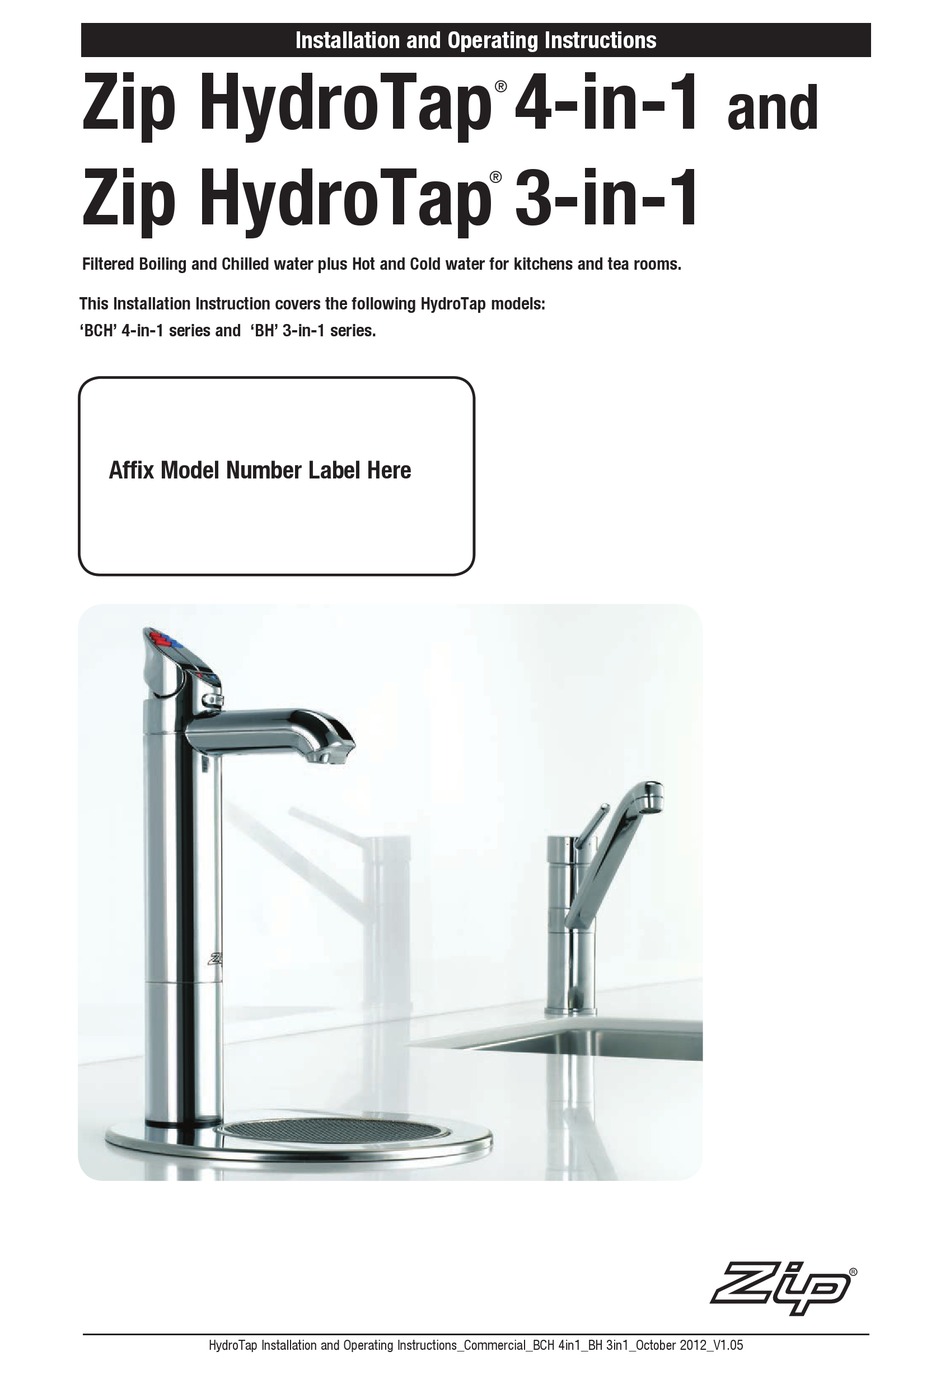 zip-hydrotap-4-in-1-installation-and-operating-instructions-manual-pdf